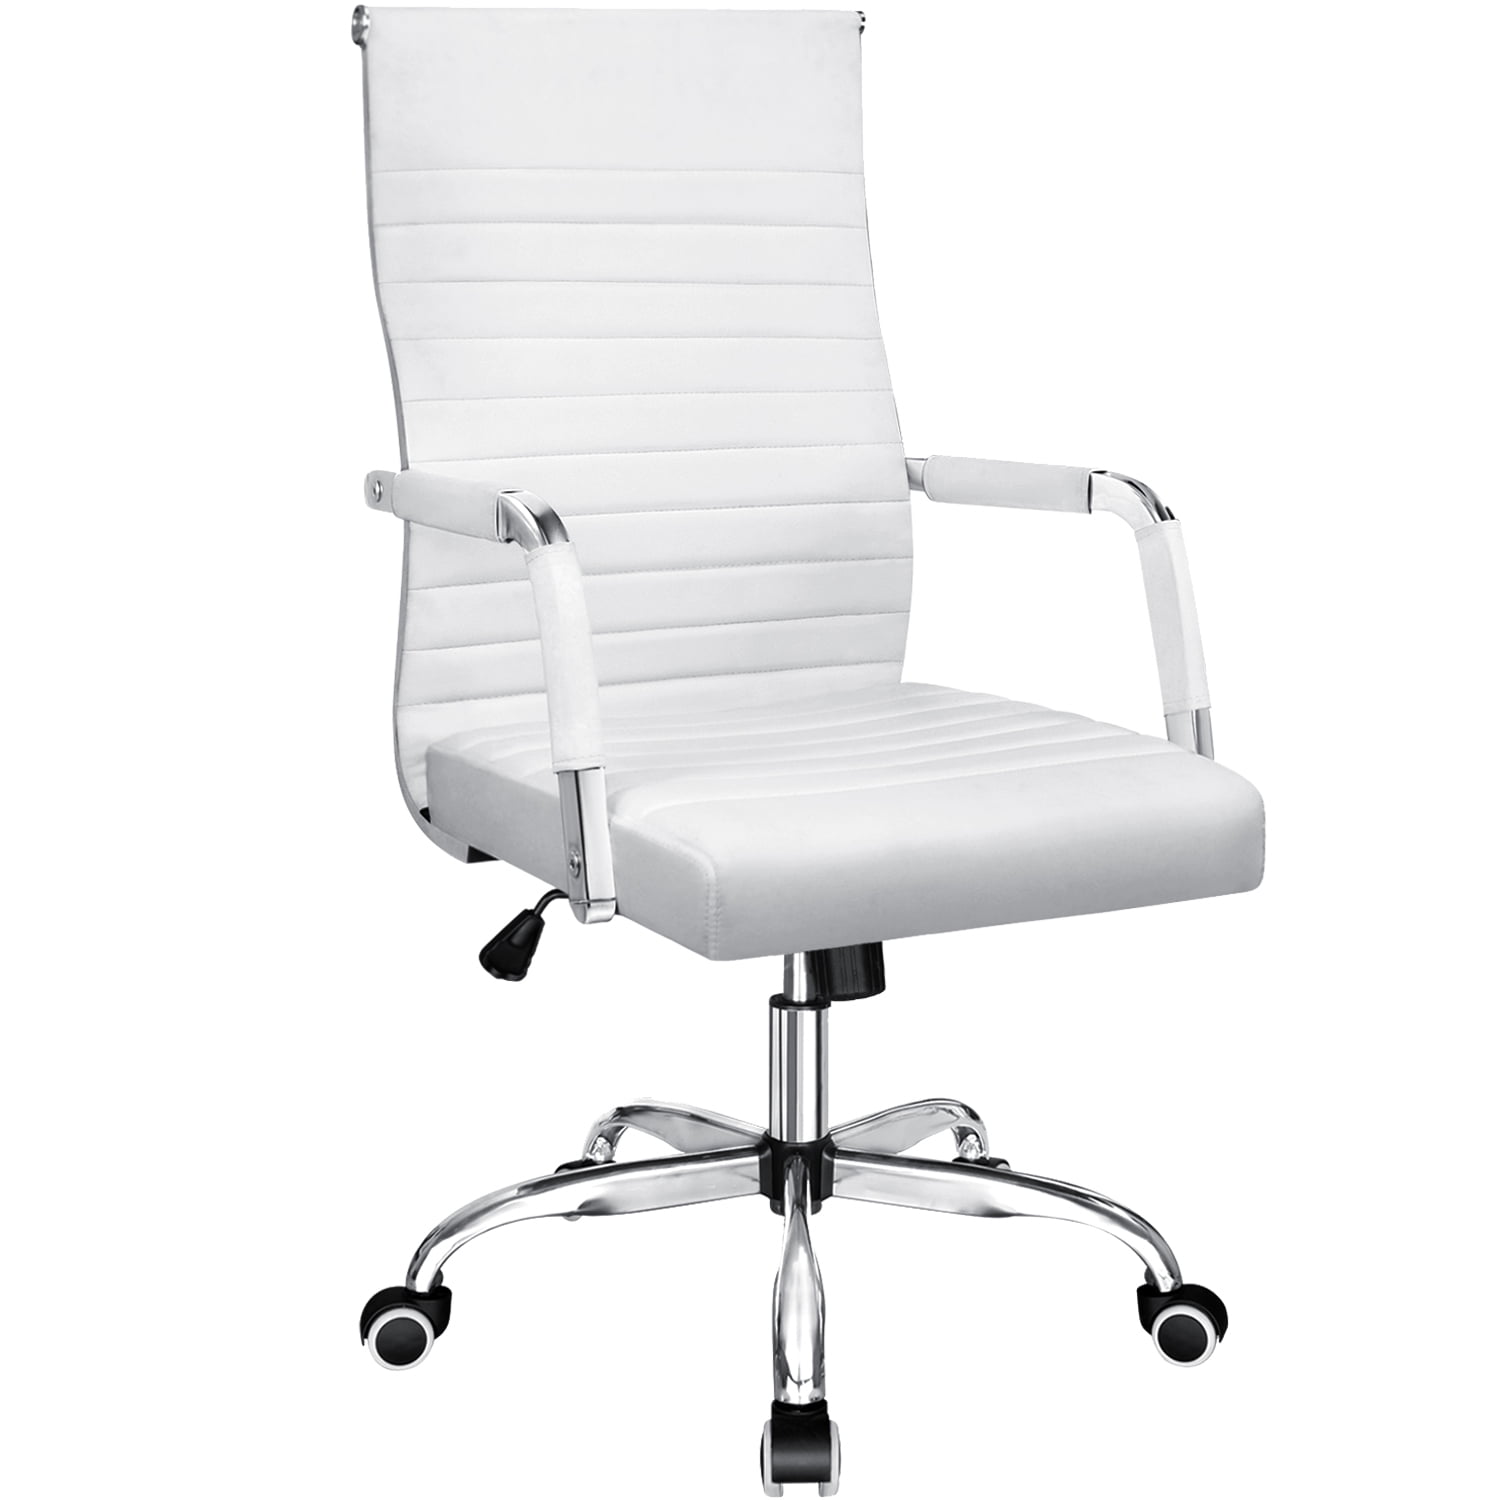 Furmax Ribbed Executive Chair with Swivel & Lumbar Support, 280 lb